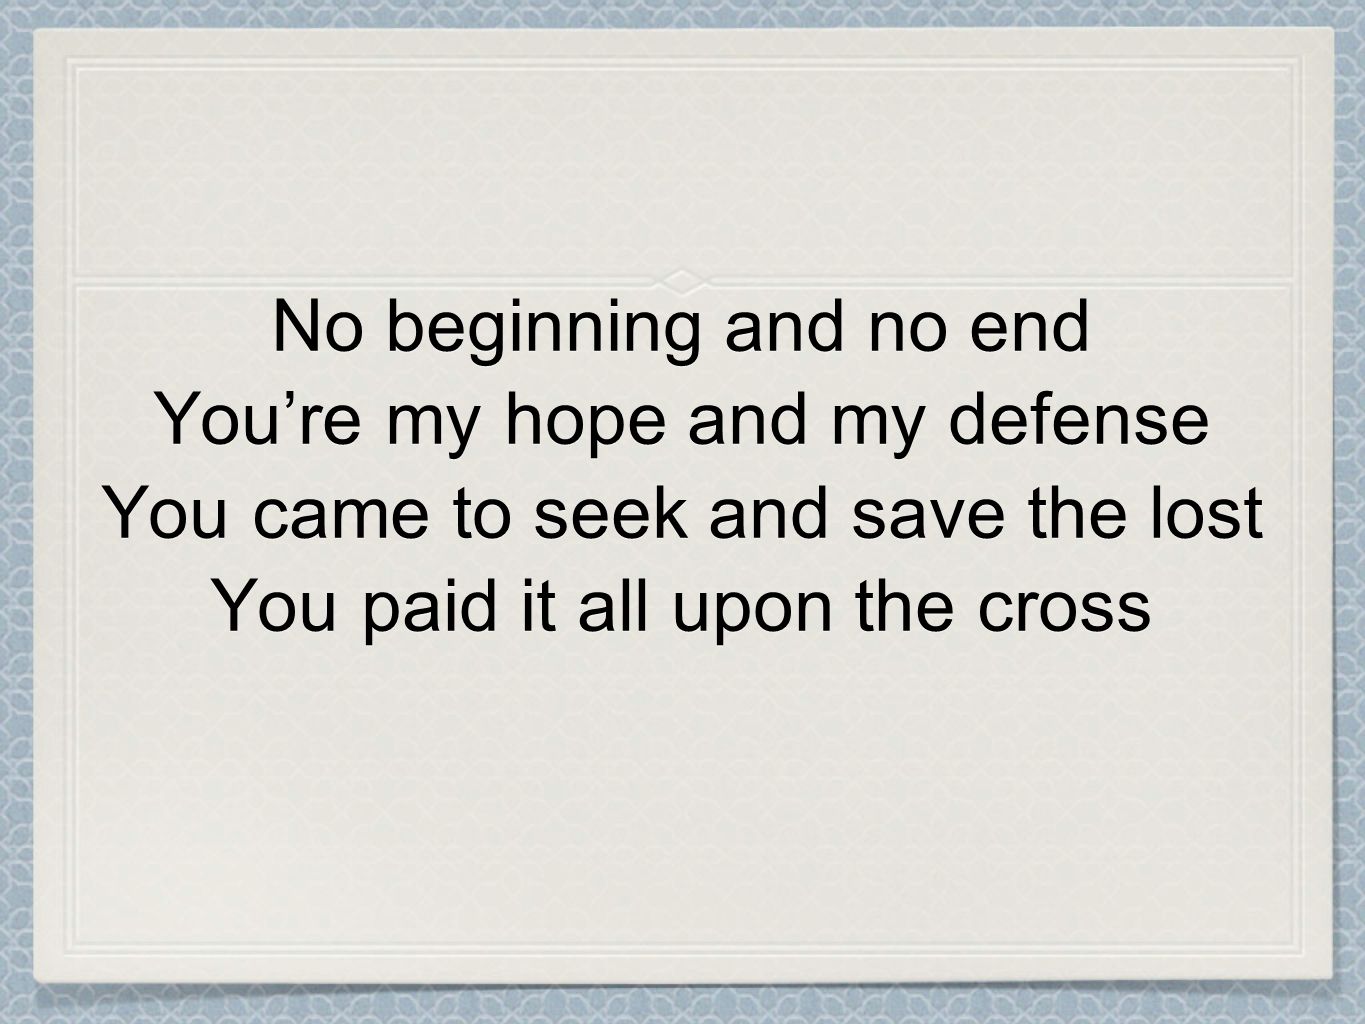 No beginning and no end You’re my hope and my defense You came to seek and save the lost You paid it all upon the cross